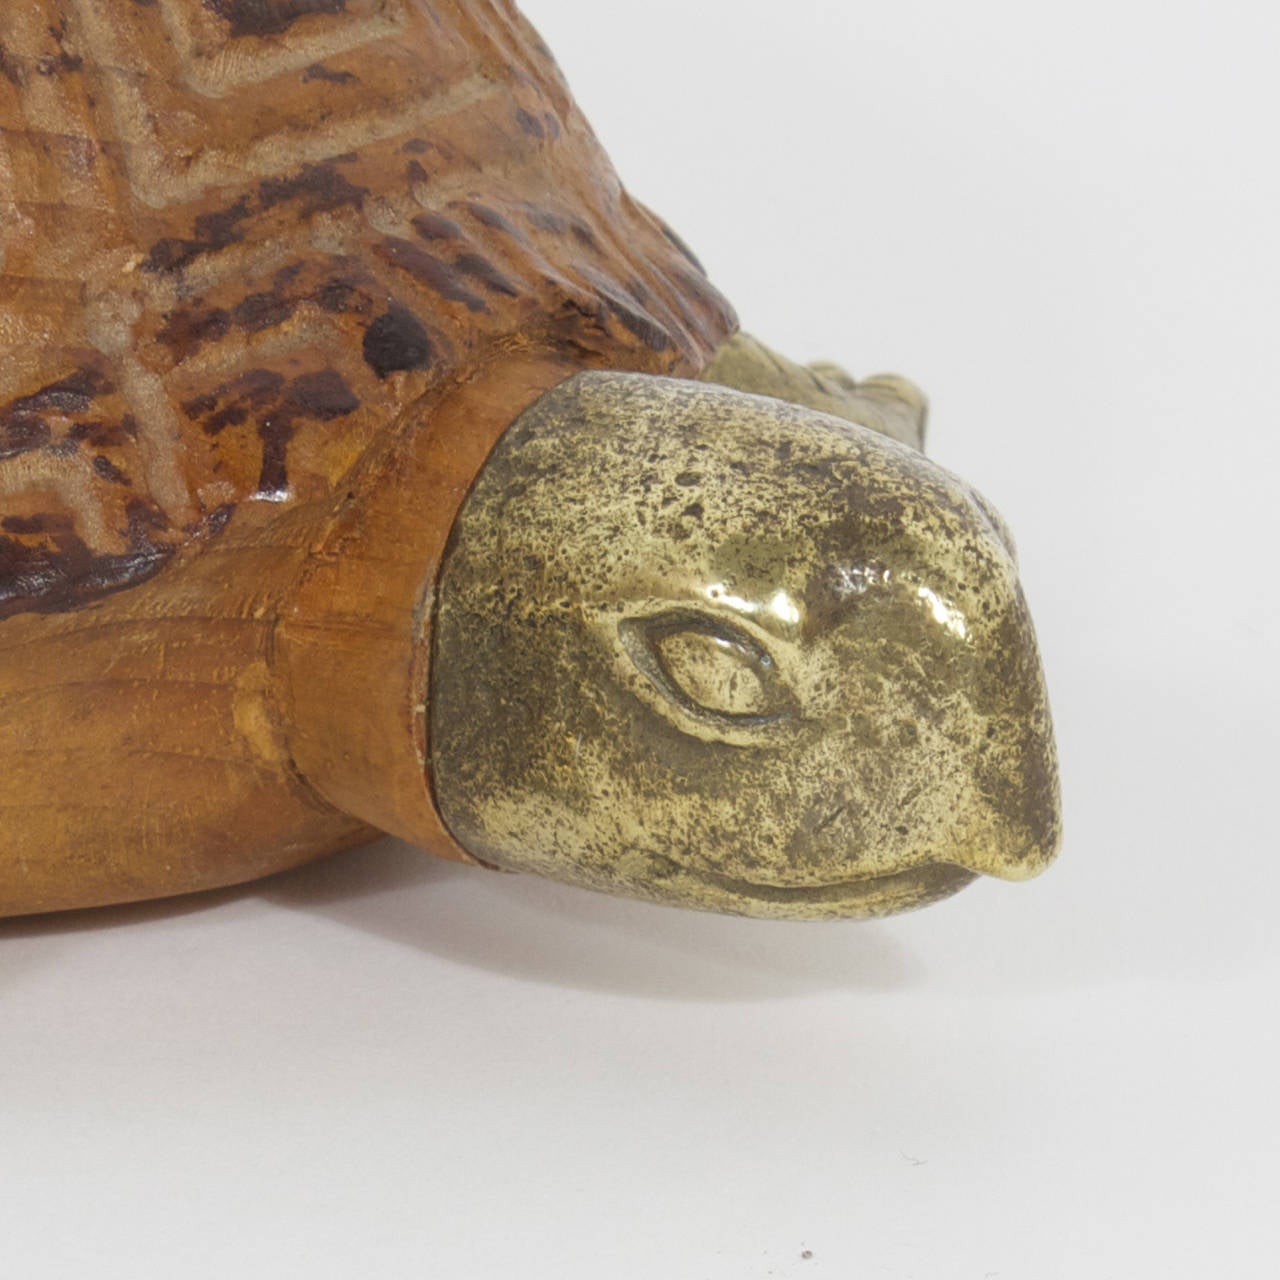 Sarreid turtle carved from a single block of exotic wood to create a life like turtle shell.  The legs, head and tail are made of Brass and make an intriguing blend of colors and textures. Slow and steady wins the race.